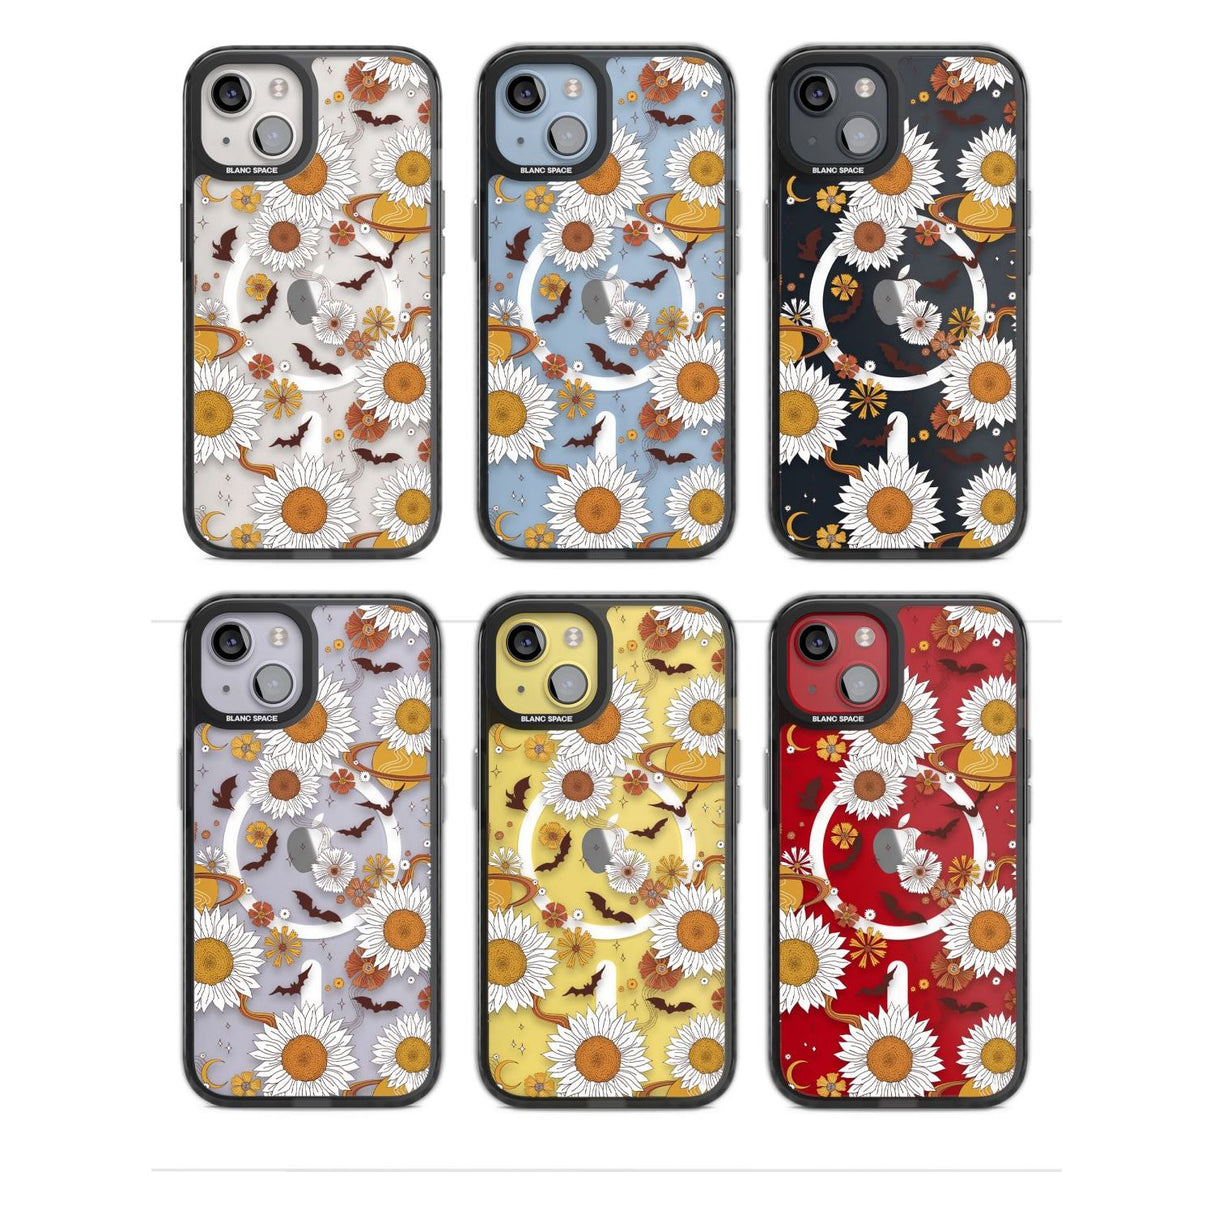 Halloween Bats and Planets Phone Case iPhone 15 Pro Max / Black Impact Case,iPhone 15 Plus / Black Impact Case,iPhone 15 Pro / Black Impact Case,iPhone 15 / Black Impact Case,iPhone 15 Pro Max / Impact Case,iPhone 15 Plus / Impact Case,iPhone 15 Pro / Impact Case,iPhone 15 / Impact Case,iPhone 15 Pro Max / Magsafe Black Impact Case,iPhone 15 Plus / Magsafe Black Impact Case,iPhone 15 Pro / Magsafe Black Impact Case,iPhone 15 / Magsafe Black Impact Case,iPhone 14 Pro Max / Black Impact Case,iPhone 14 Plus / 